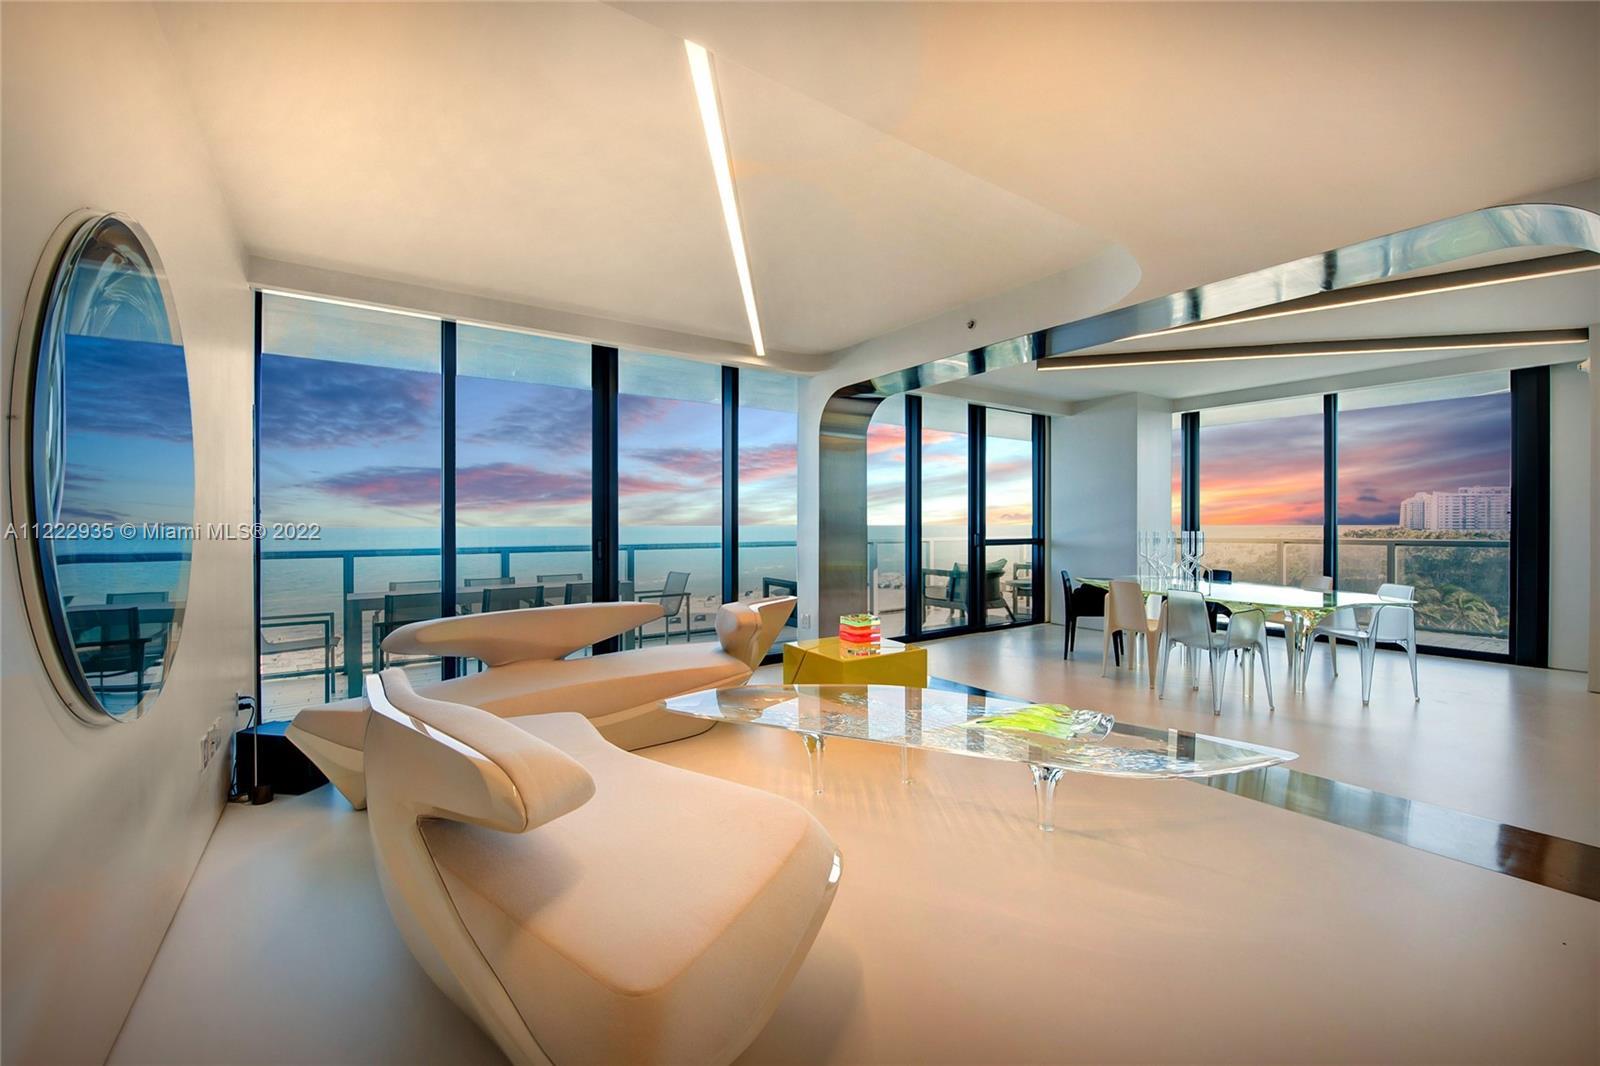 Renowned Architect Zaha Hadid's masterpiece residence at the world-renowned W South Beach. This stun